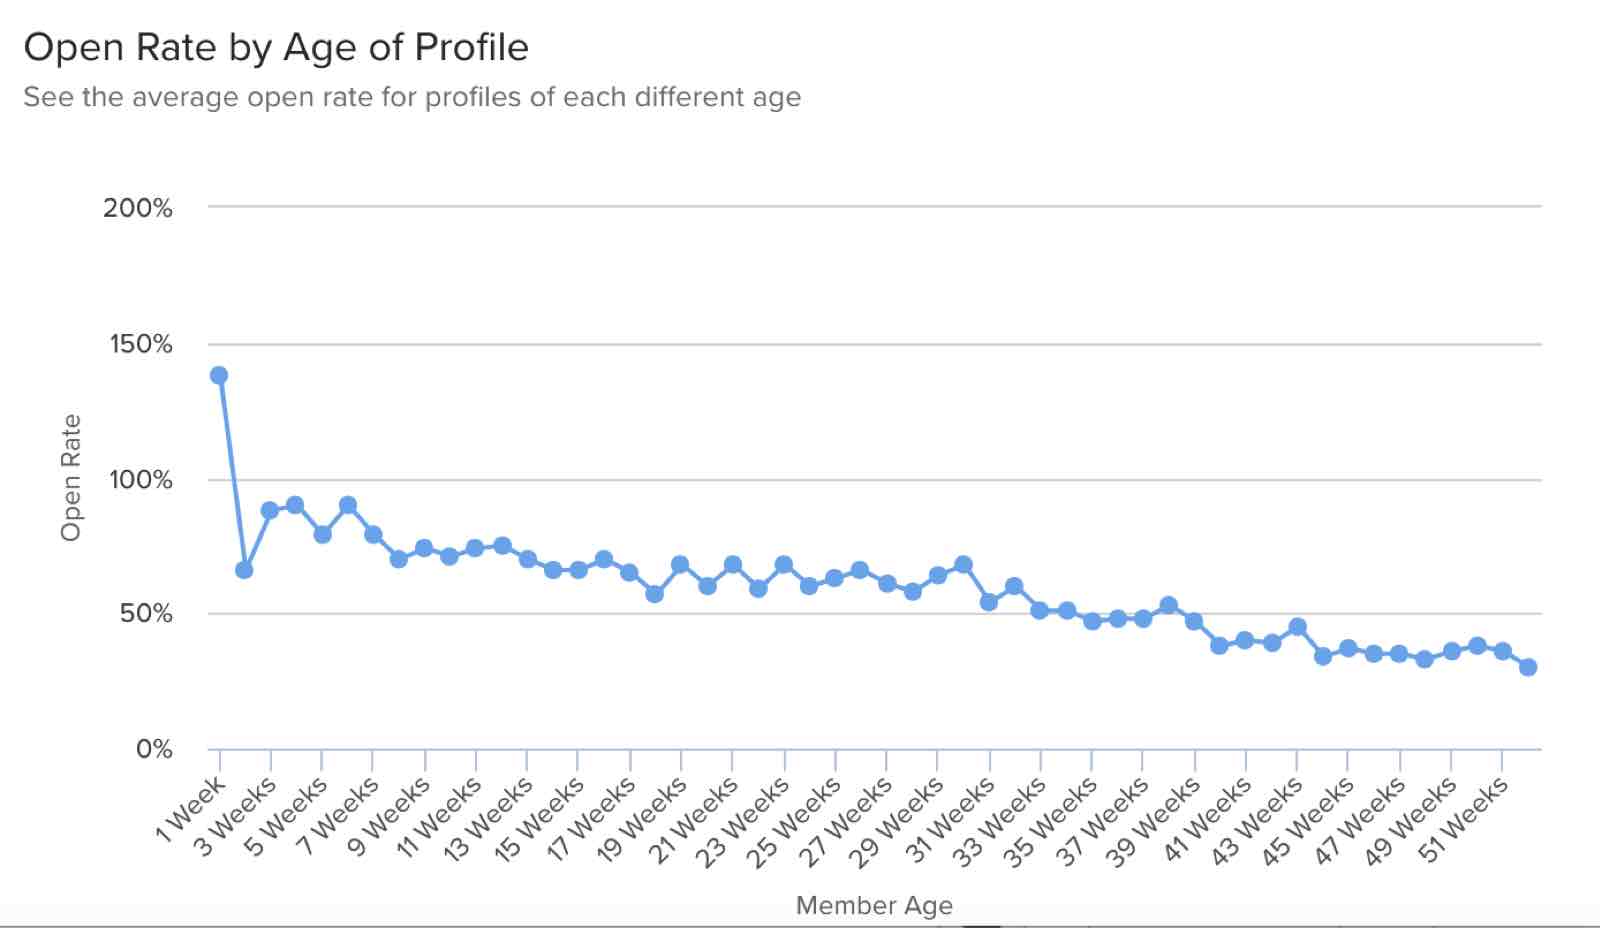 Open rates based on a profile's age